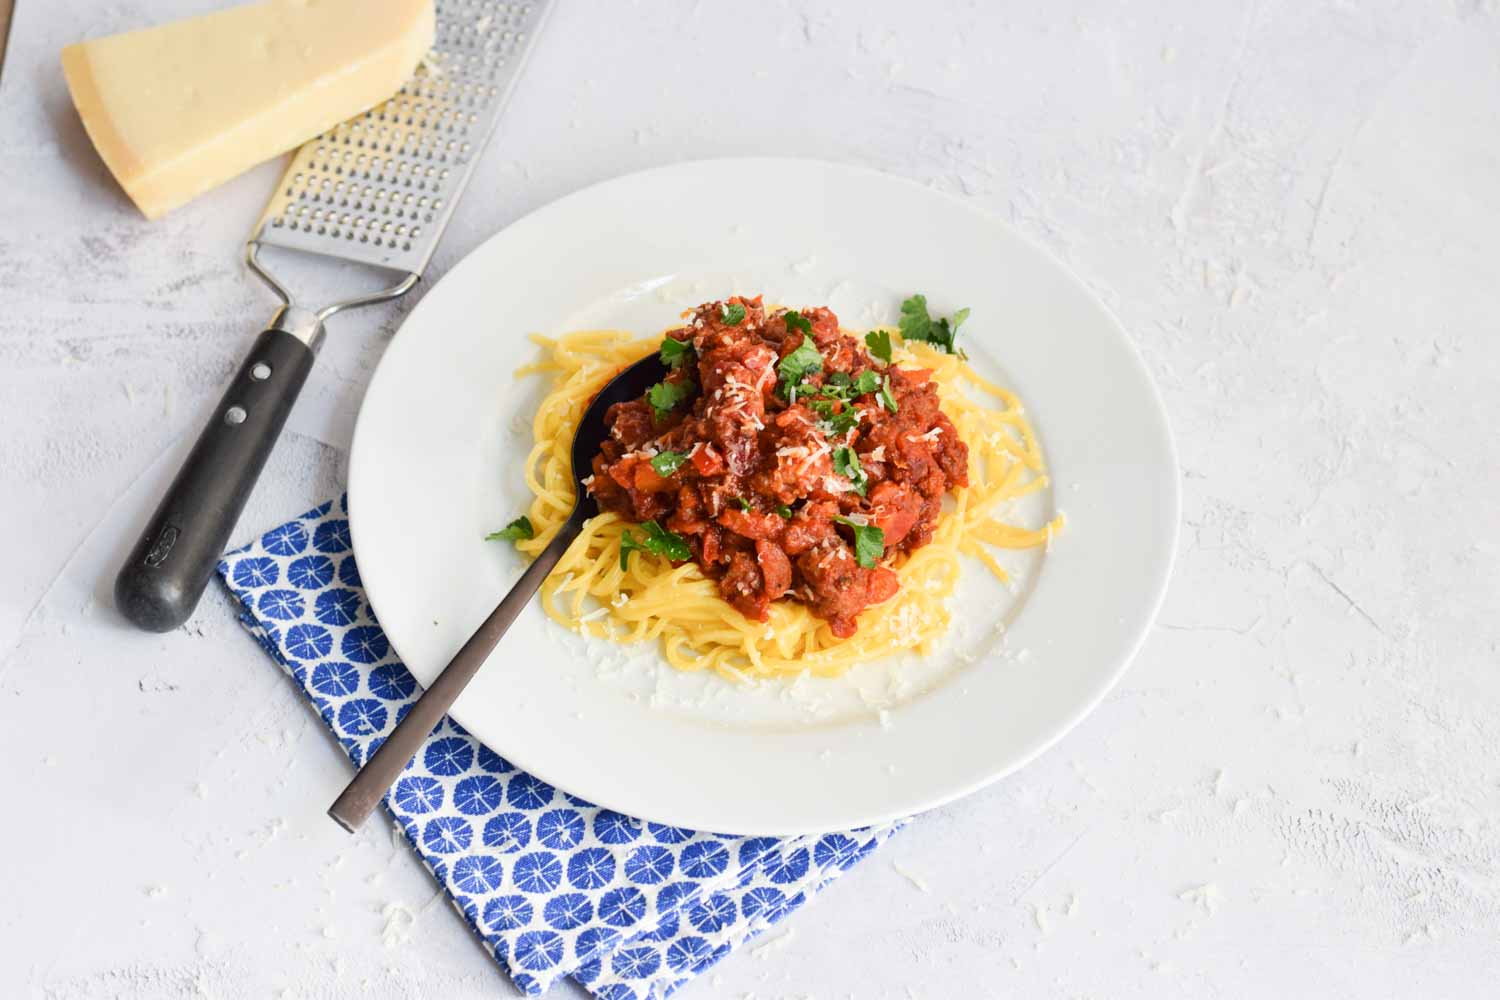 Low FODMAP pasta al ragù on a plate with a piece of parmesan cheese next to it